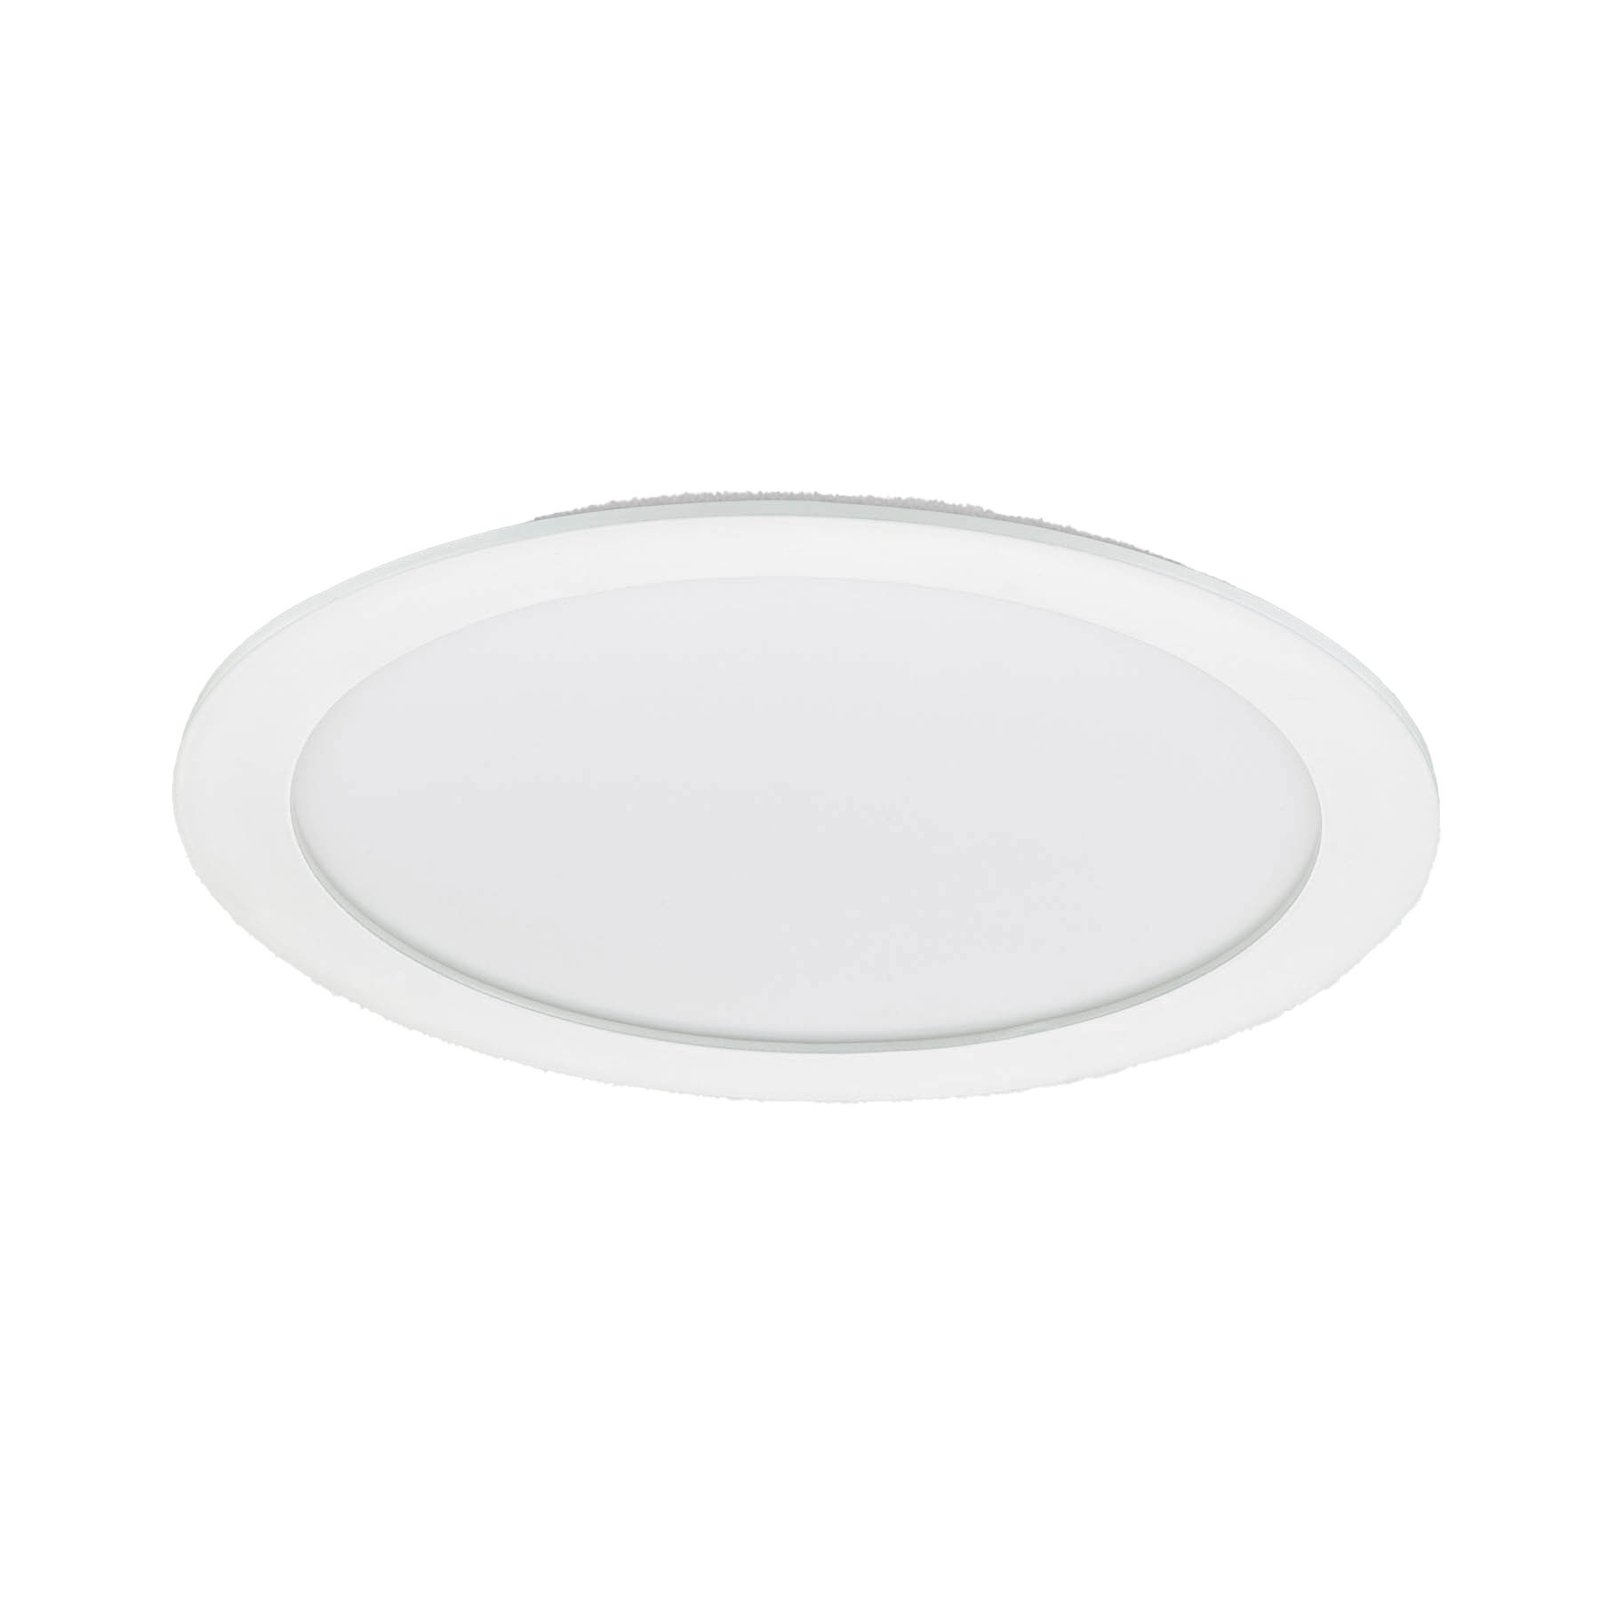 LED recessed downlight DN145B LED20S/840 PSD-E II WH